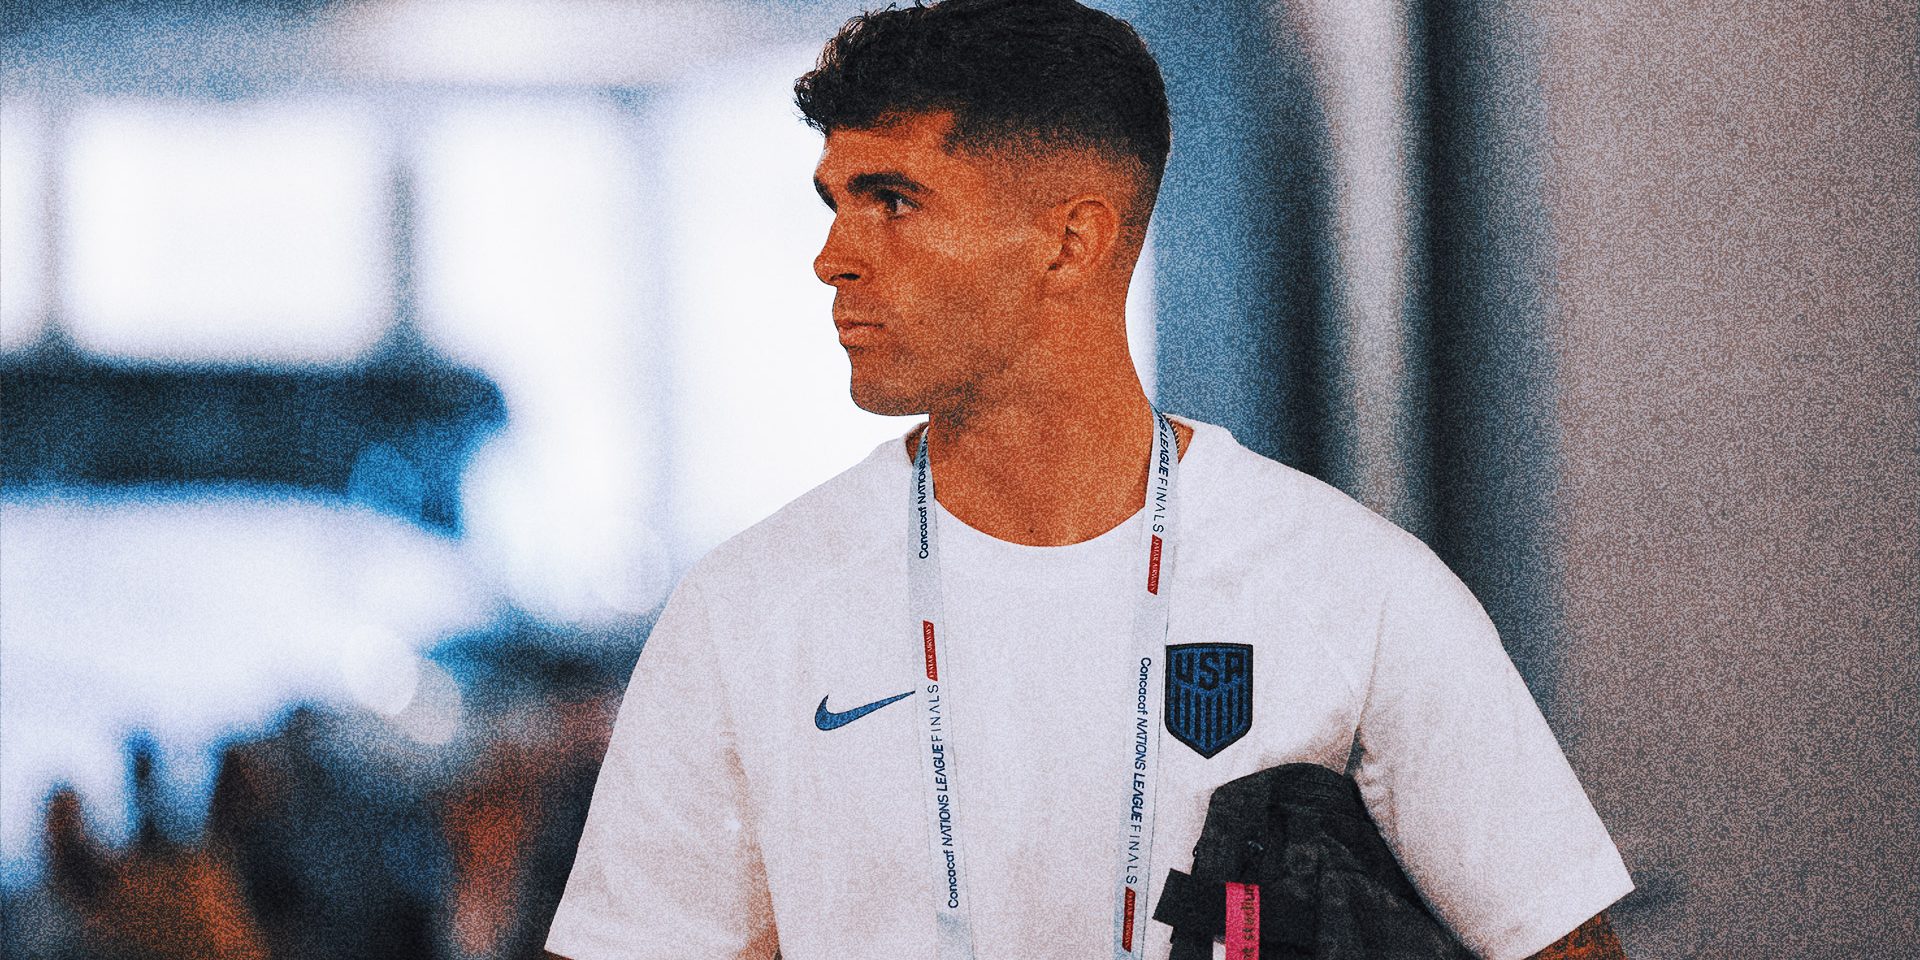 USMNT star Christian Pulisic arrives in Italy for AC Milan medical